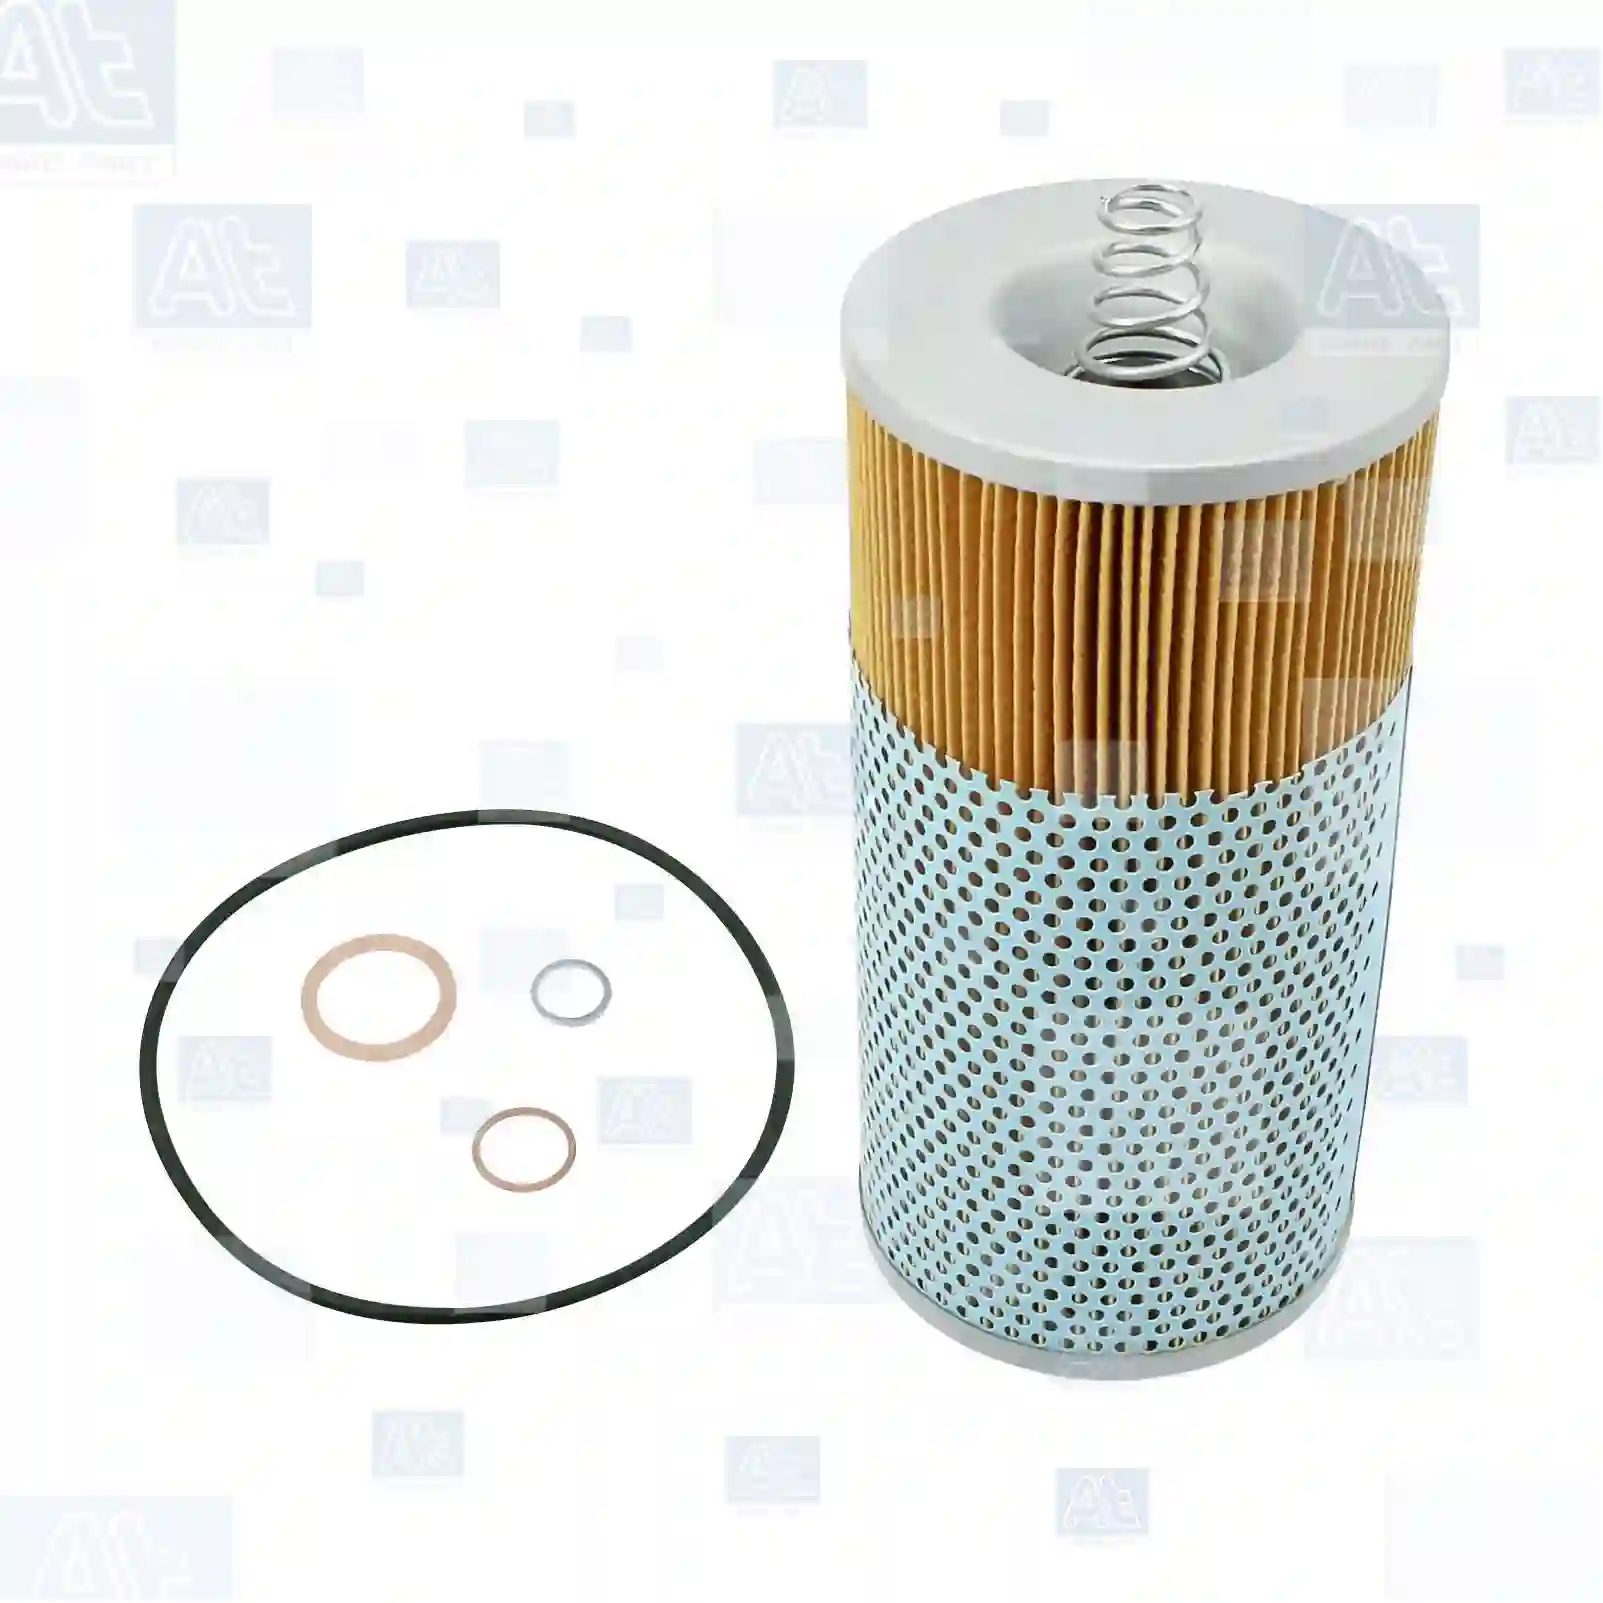 Oil filter insert, 77702597, 11843825, 3371420R1, 7984943, 11843825, 1843825, 4021800009, 4031840025, 4221800210, DC221240, 0001336290, 1500882, BBU6227, 00760424, 760142, 76014200, 760424, 76042400, 988768, 98876800, 5011426, 5011447, 5011889, 7984943, 9975291, 7984923, 7984943, 3371420R1, 108205055, 40001359, 10224238, 5507784, 5602073, 560207308, 7002915, 51000000238, 51005040044, 51005040087, 51055040031, 51055040039, 51055040041, 51055040044, 51055040046, 51055040047, 51055040069, 51055040070, 51055040071, 51055040087, 51055040090, 51055040101, 51055040104, 81000000238, 81055040031, 81055040039, 81055040041, 82055040070, 82055040087, AMO41905, 0001801109, 0001843825, 0011840325, 0011840625, 0011843825, 0021847725, 0402180009, 0412180009, 2031840025, 4021800009, 4031840025, 4221800210, AM041701, 5000043298, 5000243098, 6005019815, LU8425, 8311999136, 8319000098, 51055040087, ZG01733-0008 ||  77702597 At Spare Part | Engine, Accelerator Pedal, Camshaft, Connecting Rod, Crankcase, Crankshaft, Cylinder Head, Engine Suspension Mountings, Exhaust Manifold, Exhaust Gas Recirculation, Filter Kits, Flywheel Housing, General Overhaul Kits, Engine, Intake Manifold, Oil Cleaner, Oil Cooler, Oil Filter, Oil Pump, Oil Sump, Piston & Liner, Sensor & Switch, Timing Case, Turbocharger, Cooling System, Belt Tensioner, Coolant Filter, Coolant Pipe, Corrosion Prevention Agent, Drive, Expansion Tank, Fan, Intercooler, Monitors & Gauges, Radiator, Thermostat, V-Belt / Timing belt, Water Pump, Fuel System, Electronical Injector Unit, Feed Pump, Fuel Filter, cpl., Fuel Gauge Sender,  Fuel Line, Fuel Pump, Fuel Tank, Injection Line Kit, Injection Pump, Exhaust System, Clutch & Pedal, Gearbox, Propeller Shaft, Axles, Brake System, Hubs & Wheels, Suspension, Leaf Spring, Universal Parts / Accessories, Steering, Electrical System, Cabin Oil filter insert, 77702597, 11843825, 3371420R1, 7984943, 11843825, 1843825, 4021800009, 4031840025, 4221800210, DC221240, 0001336290, 1500882, BBU6227, 00760424, 760142, 76014200, 760424, 76042400, 988768, 98876800, 5011426, 5011447, 5011889, 7984943, 9975291, 7984923, 7984943, 3371420R1, 108205055, 40001359, 10224238, 5507784, 5602073, 560207308, 7002915, 51000000238, 51005040044, 51005040087, 51055040031, 51055040039, 51055040041, 51055040044, 51055040046, 51055040047, 51055040069, 51055040070, 51055040071, 51055040087, 51055040090, 51055040101, 51055040104, 81000000238, 81055040031, 81055040039, 81055040041, 82055040070, 82055040087, AMO41905, 0001801109, 0001843825, 0011840325, 0011840625, 0011843825, 0021847725, 0402180009, 0412180009, 2031840025, 4021800009, 4031840025, 4221800210, AM041701, 5000043298, 5000243098, 6005019815, LU8425, 8311999136, 8319000098, 51055040087, ZG01733-0008 ||  77702597 At Spare Part | Engine, Accelerator Pedal, Camshaft, Connecting Rod, Crankcase, Crankshaft, Cylinder Head, Engine Suspension Mountings, Exhaust Manifold, Exhaust Gas Recirculation, Filter Kits, Flywheel Housing, General Overhaul Kits, Engine, Intake Manifold, Oil Cleaner, Oil Cooler, Oil Filter, Oil Pump, Oil Sump, Piston & Liner, Sensor & Switch, Timing Case, Turbocharger, Cooling System, Belt Tensioner, Coolant Filter, Coolant Pipe, Corrosion Prevention Agent, Drive, Expansion Tank, Fan, Intercooler, Monitors & Gauges, Radiator, Thermostat, V-Belt / Timing belt, Water Pump, Fuel System, Electronical Injector Unit, Feed Pump, Fuel Filter, cpl., Fuel Gauge Sender,  Fuel Line, Fuel Pump, Fuel Tank, Injection Line Kit, Injection Pump, Exhaust System, Clutch & Pedal, Gearbox, Propeller Shaft, Axles, Brake System, Hubs & Wheels, Suspension, Leaf Spring, Universal Parts / Accessories, Steering, Electrical System, Cabin